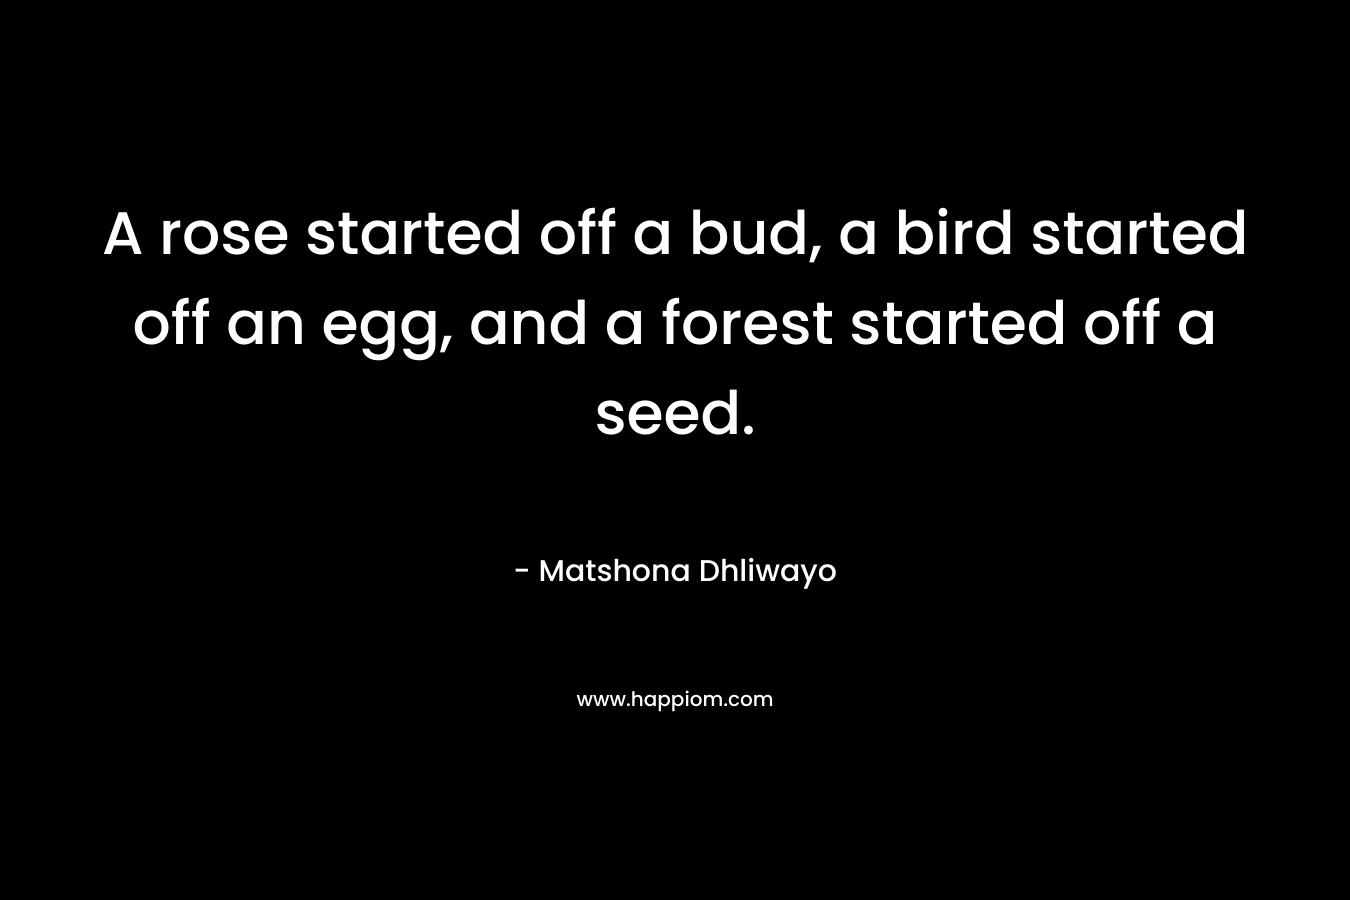 A rose started off a bud, a bird started off an egg, and a forest started off a seed.